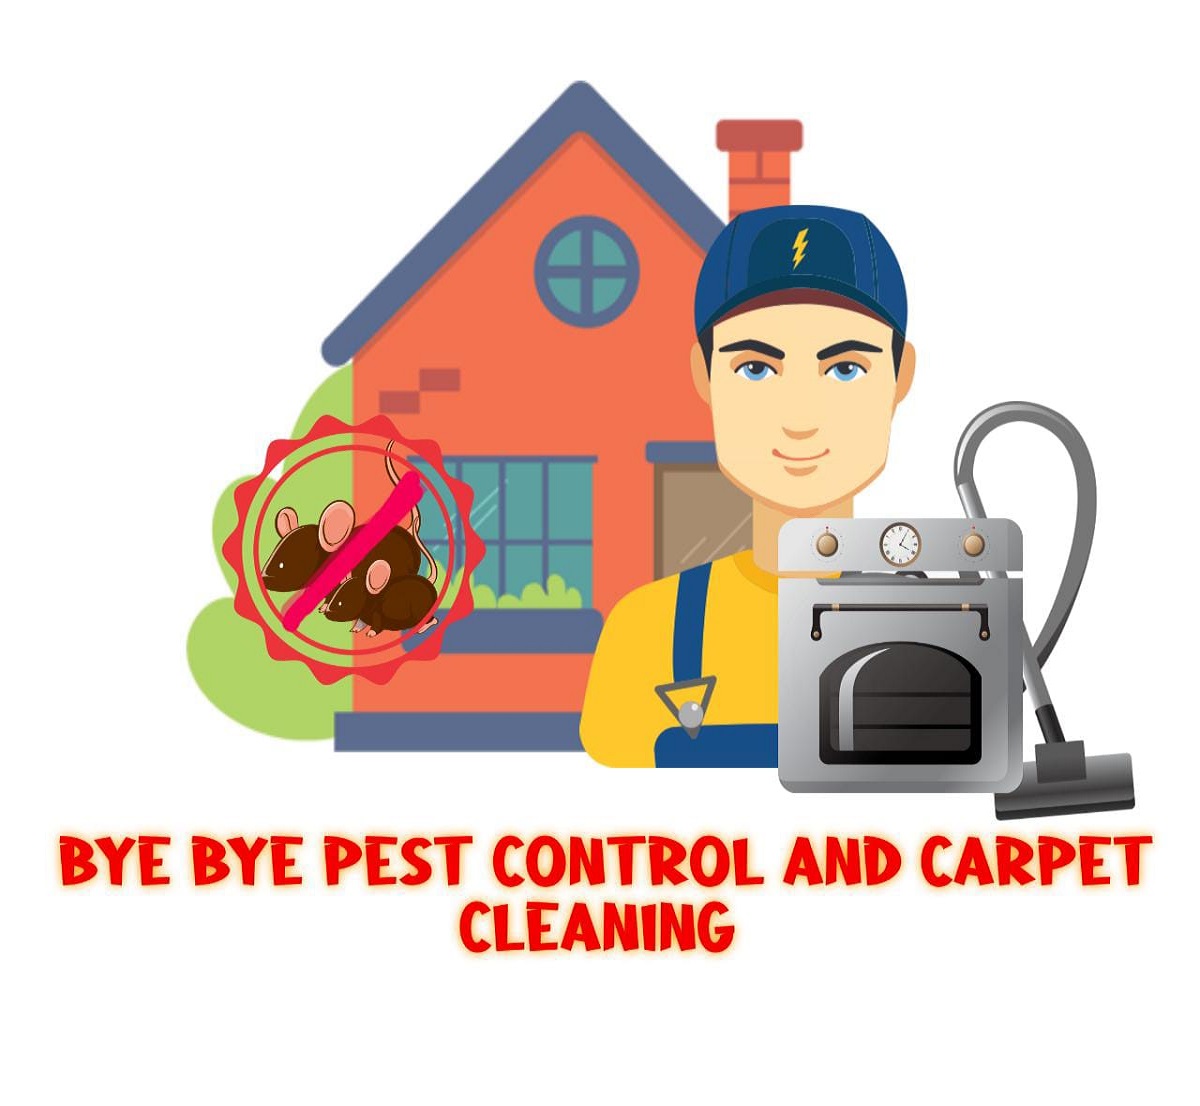 Bye Bye Pest Control and Carpet Cleaning (www.byebyepest.com.au)